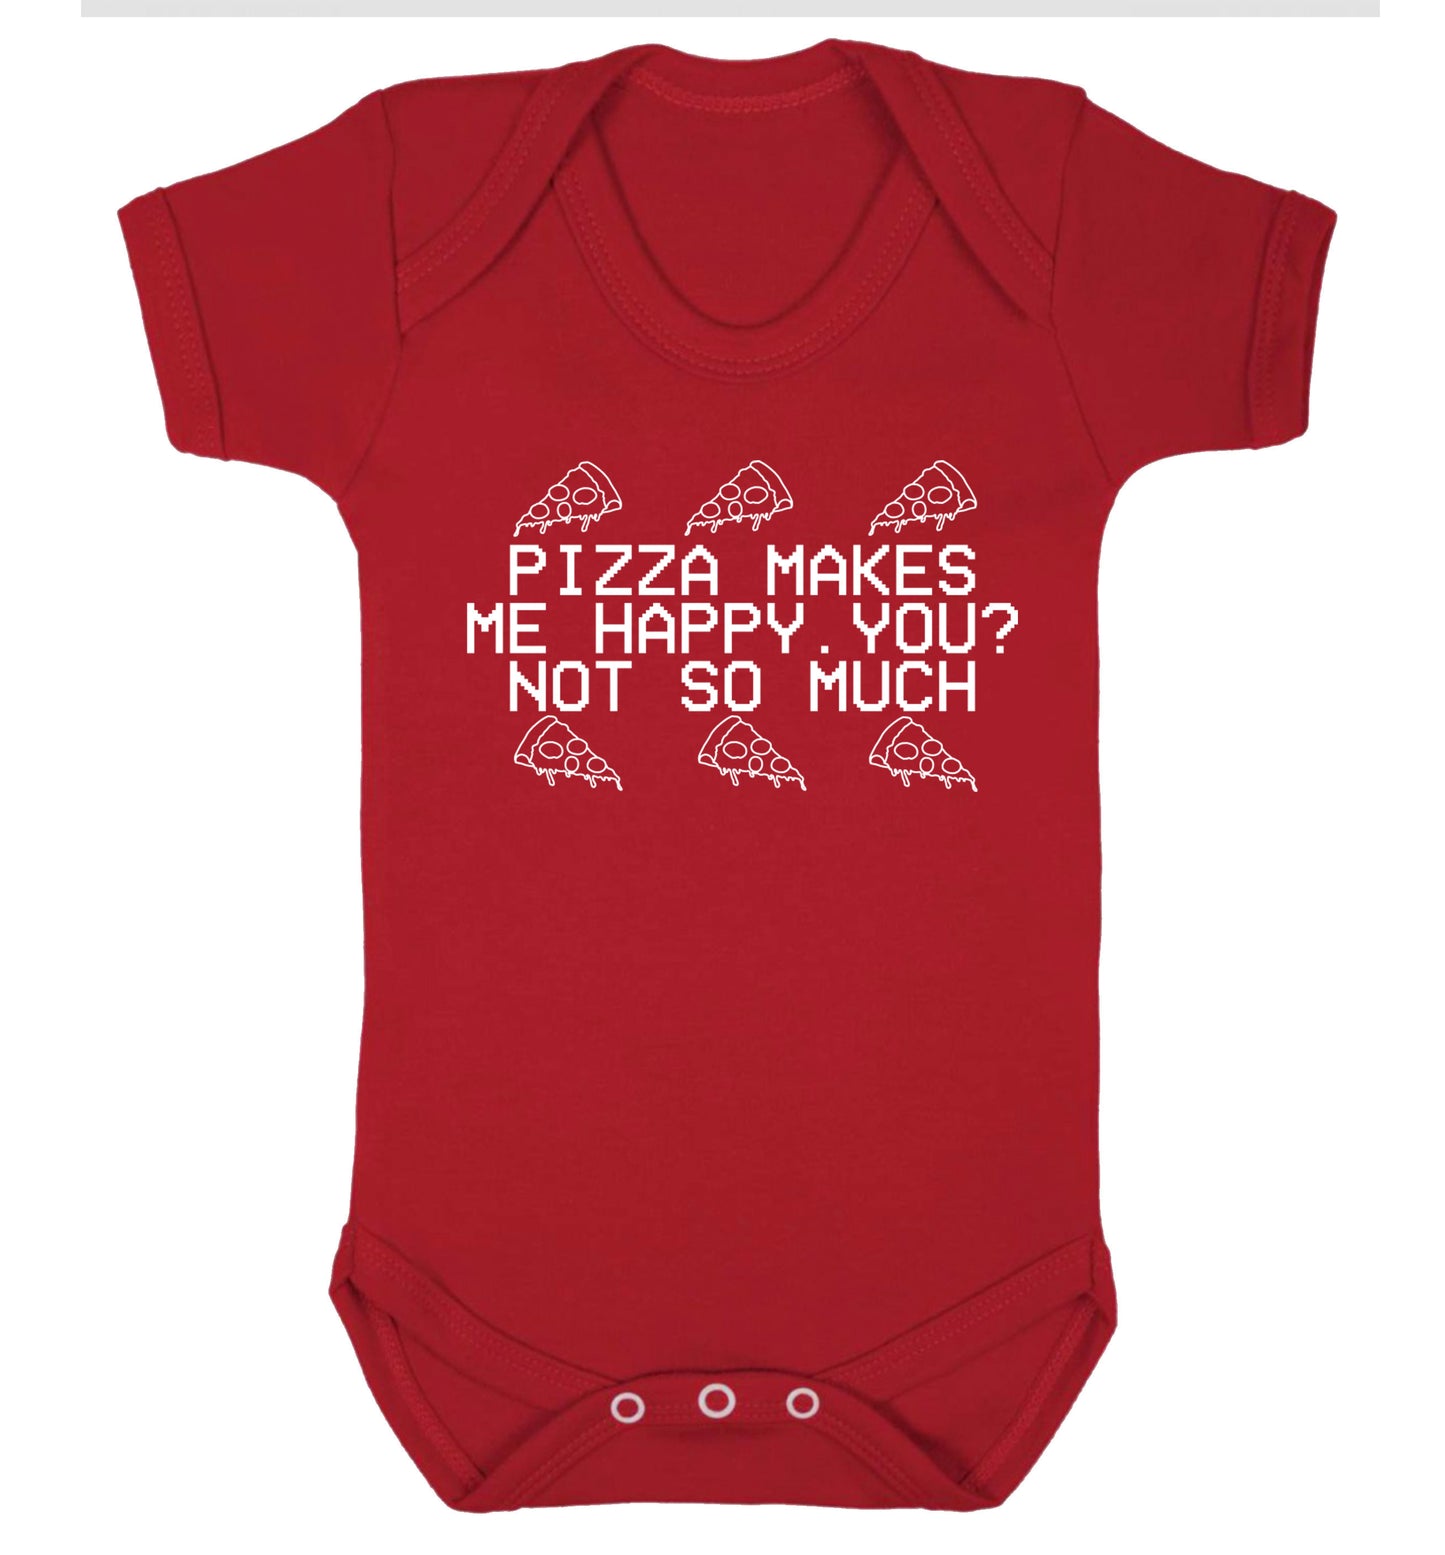 Pizza makes me happy, You? Not so much Baby Vest red 18-24 months